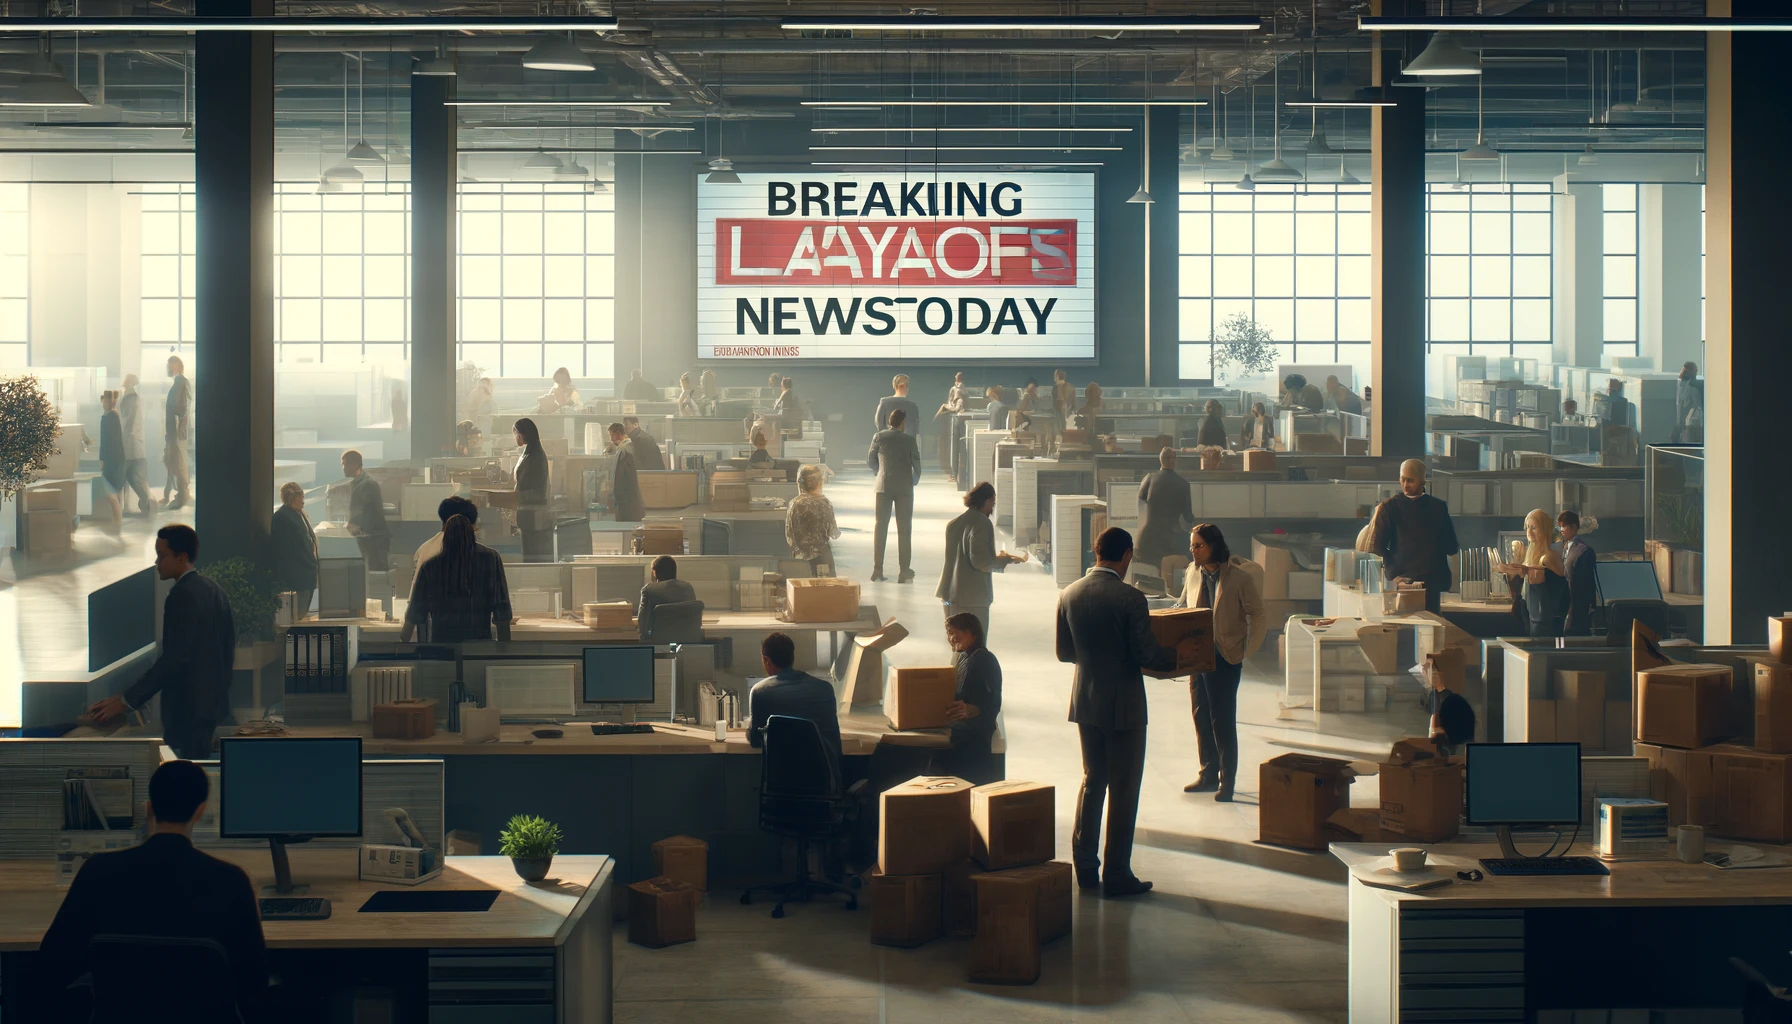 Employees packing their belongings into boxes in an office, with a 'Breaking Layoff News Today' headline displayed on a digital screen.